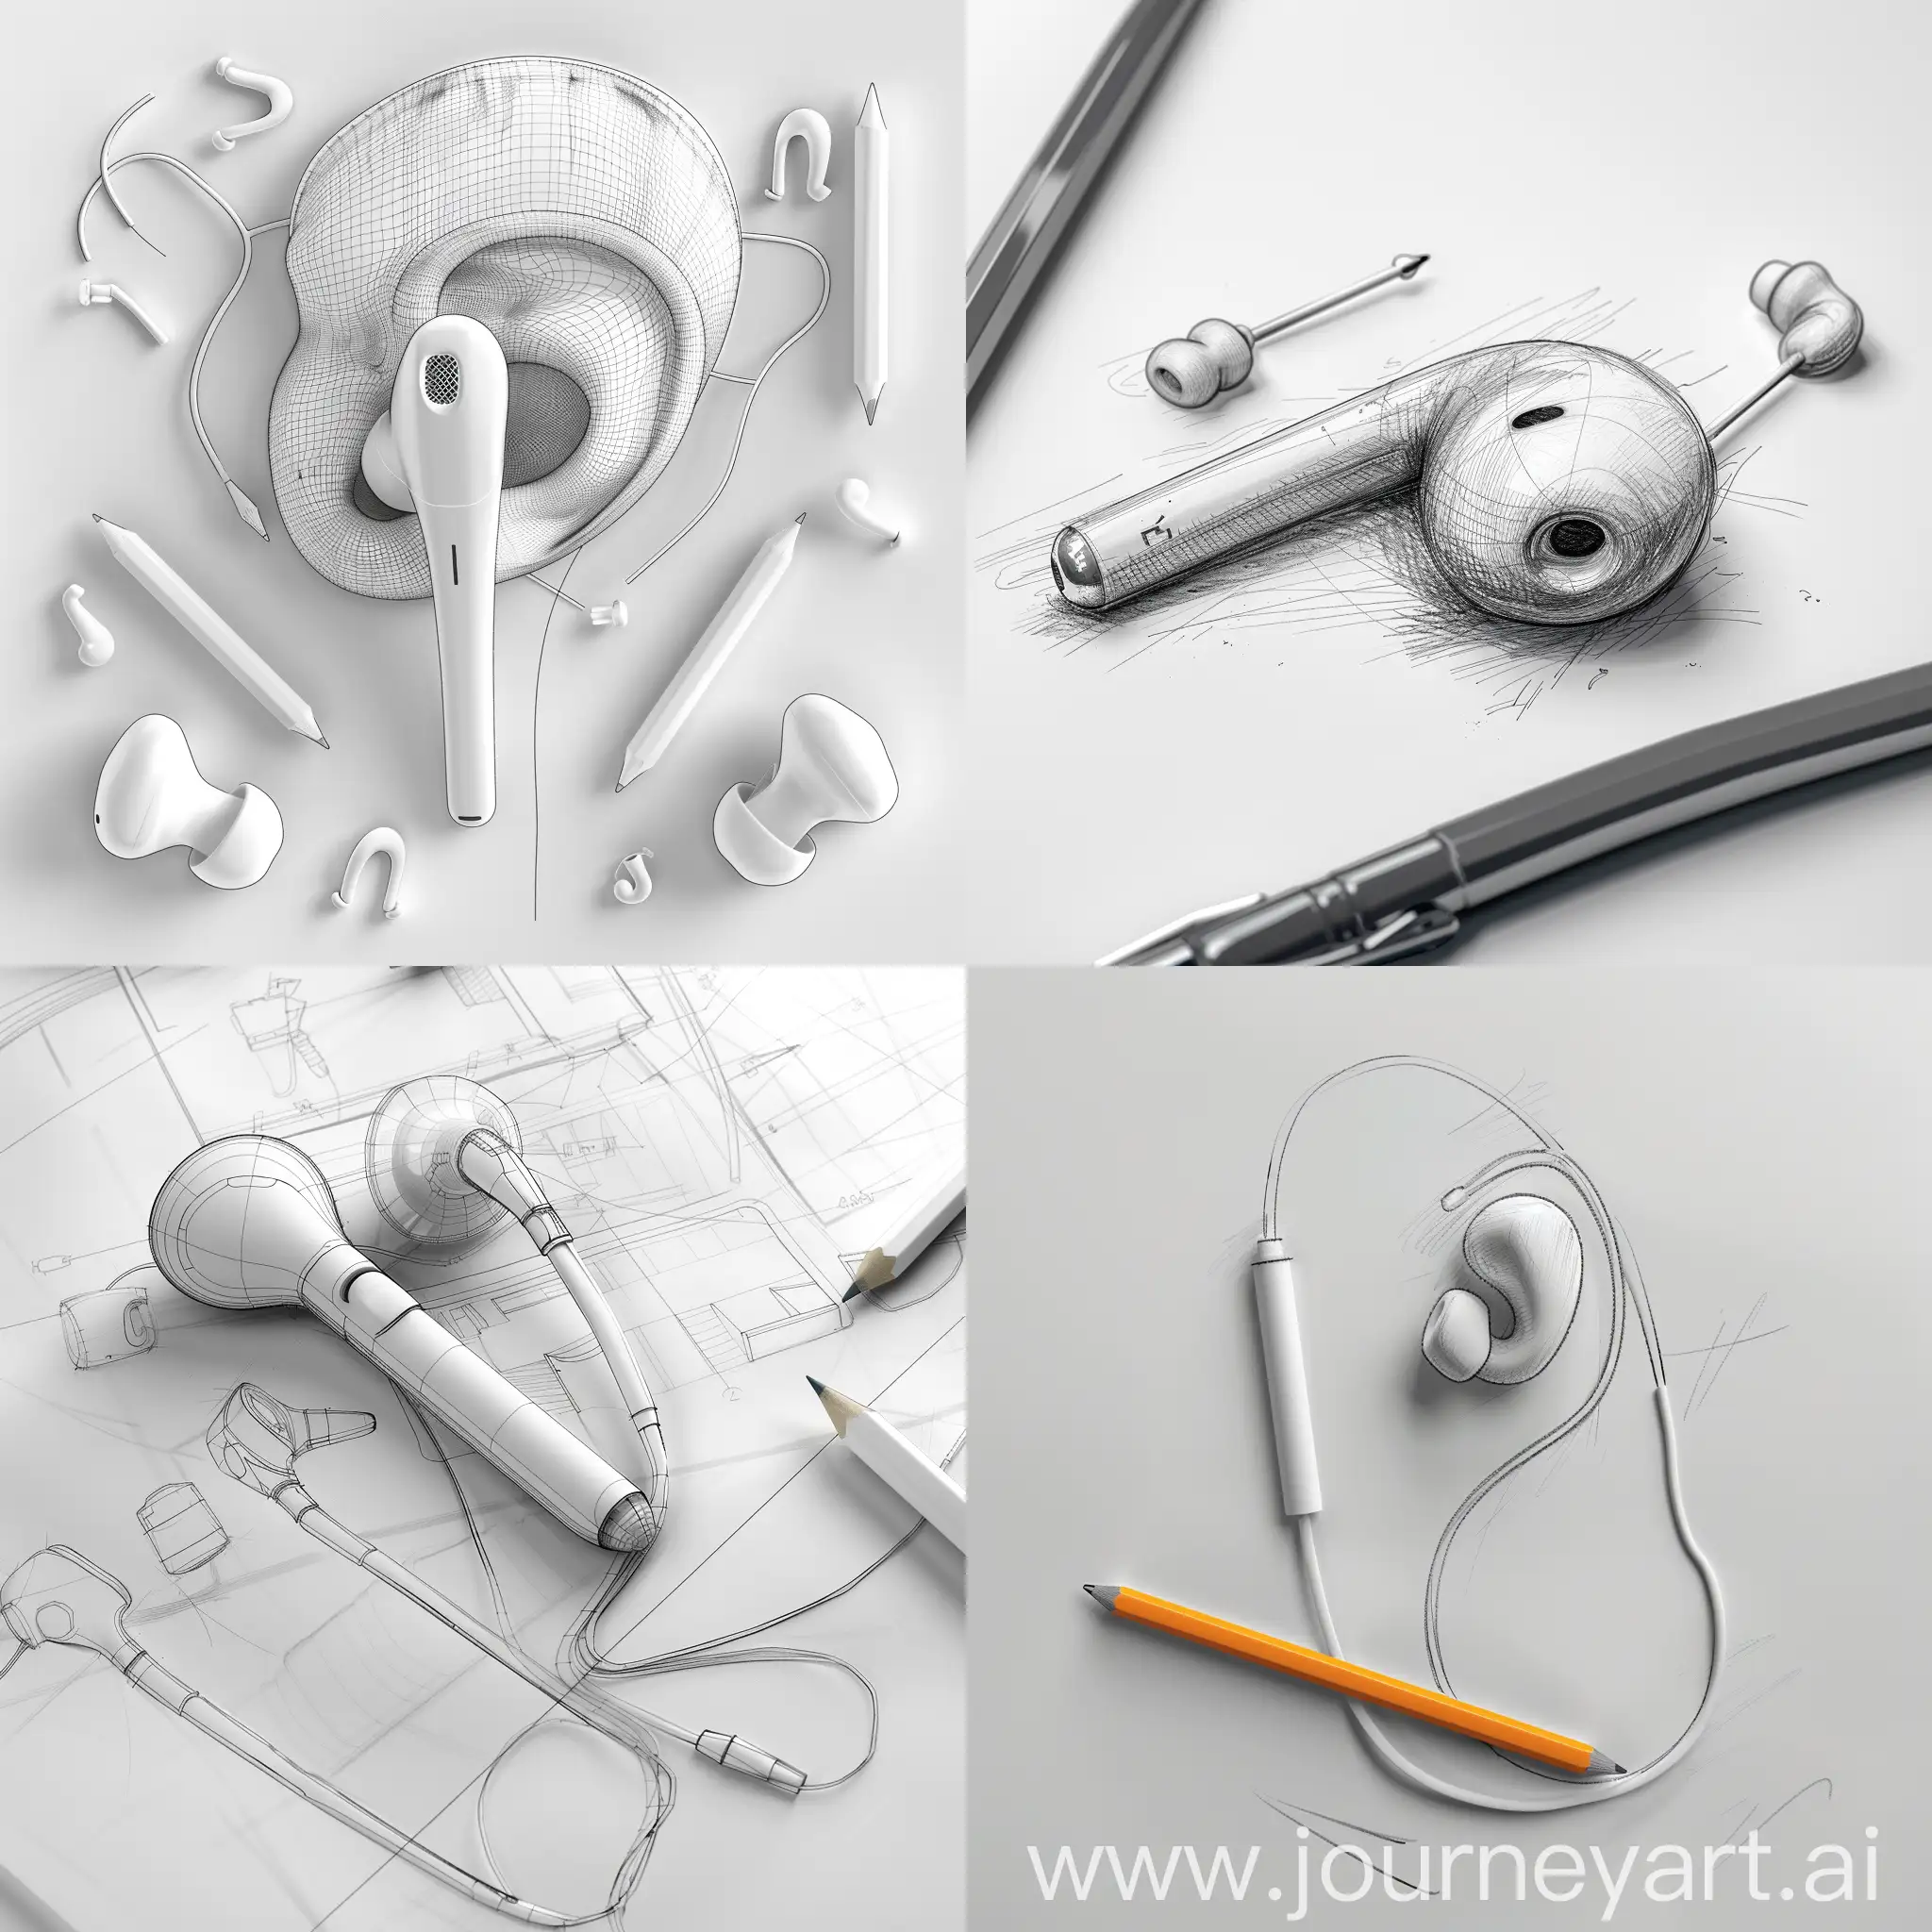 Ear-Bud-Product-Animation-Storyboard-in-Realistic-Pencil-Drawing-4K-Quality